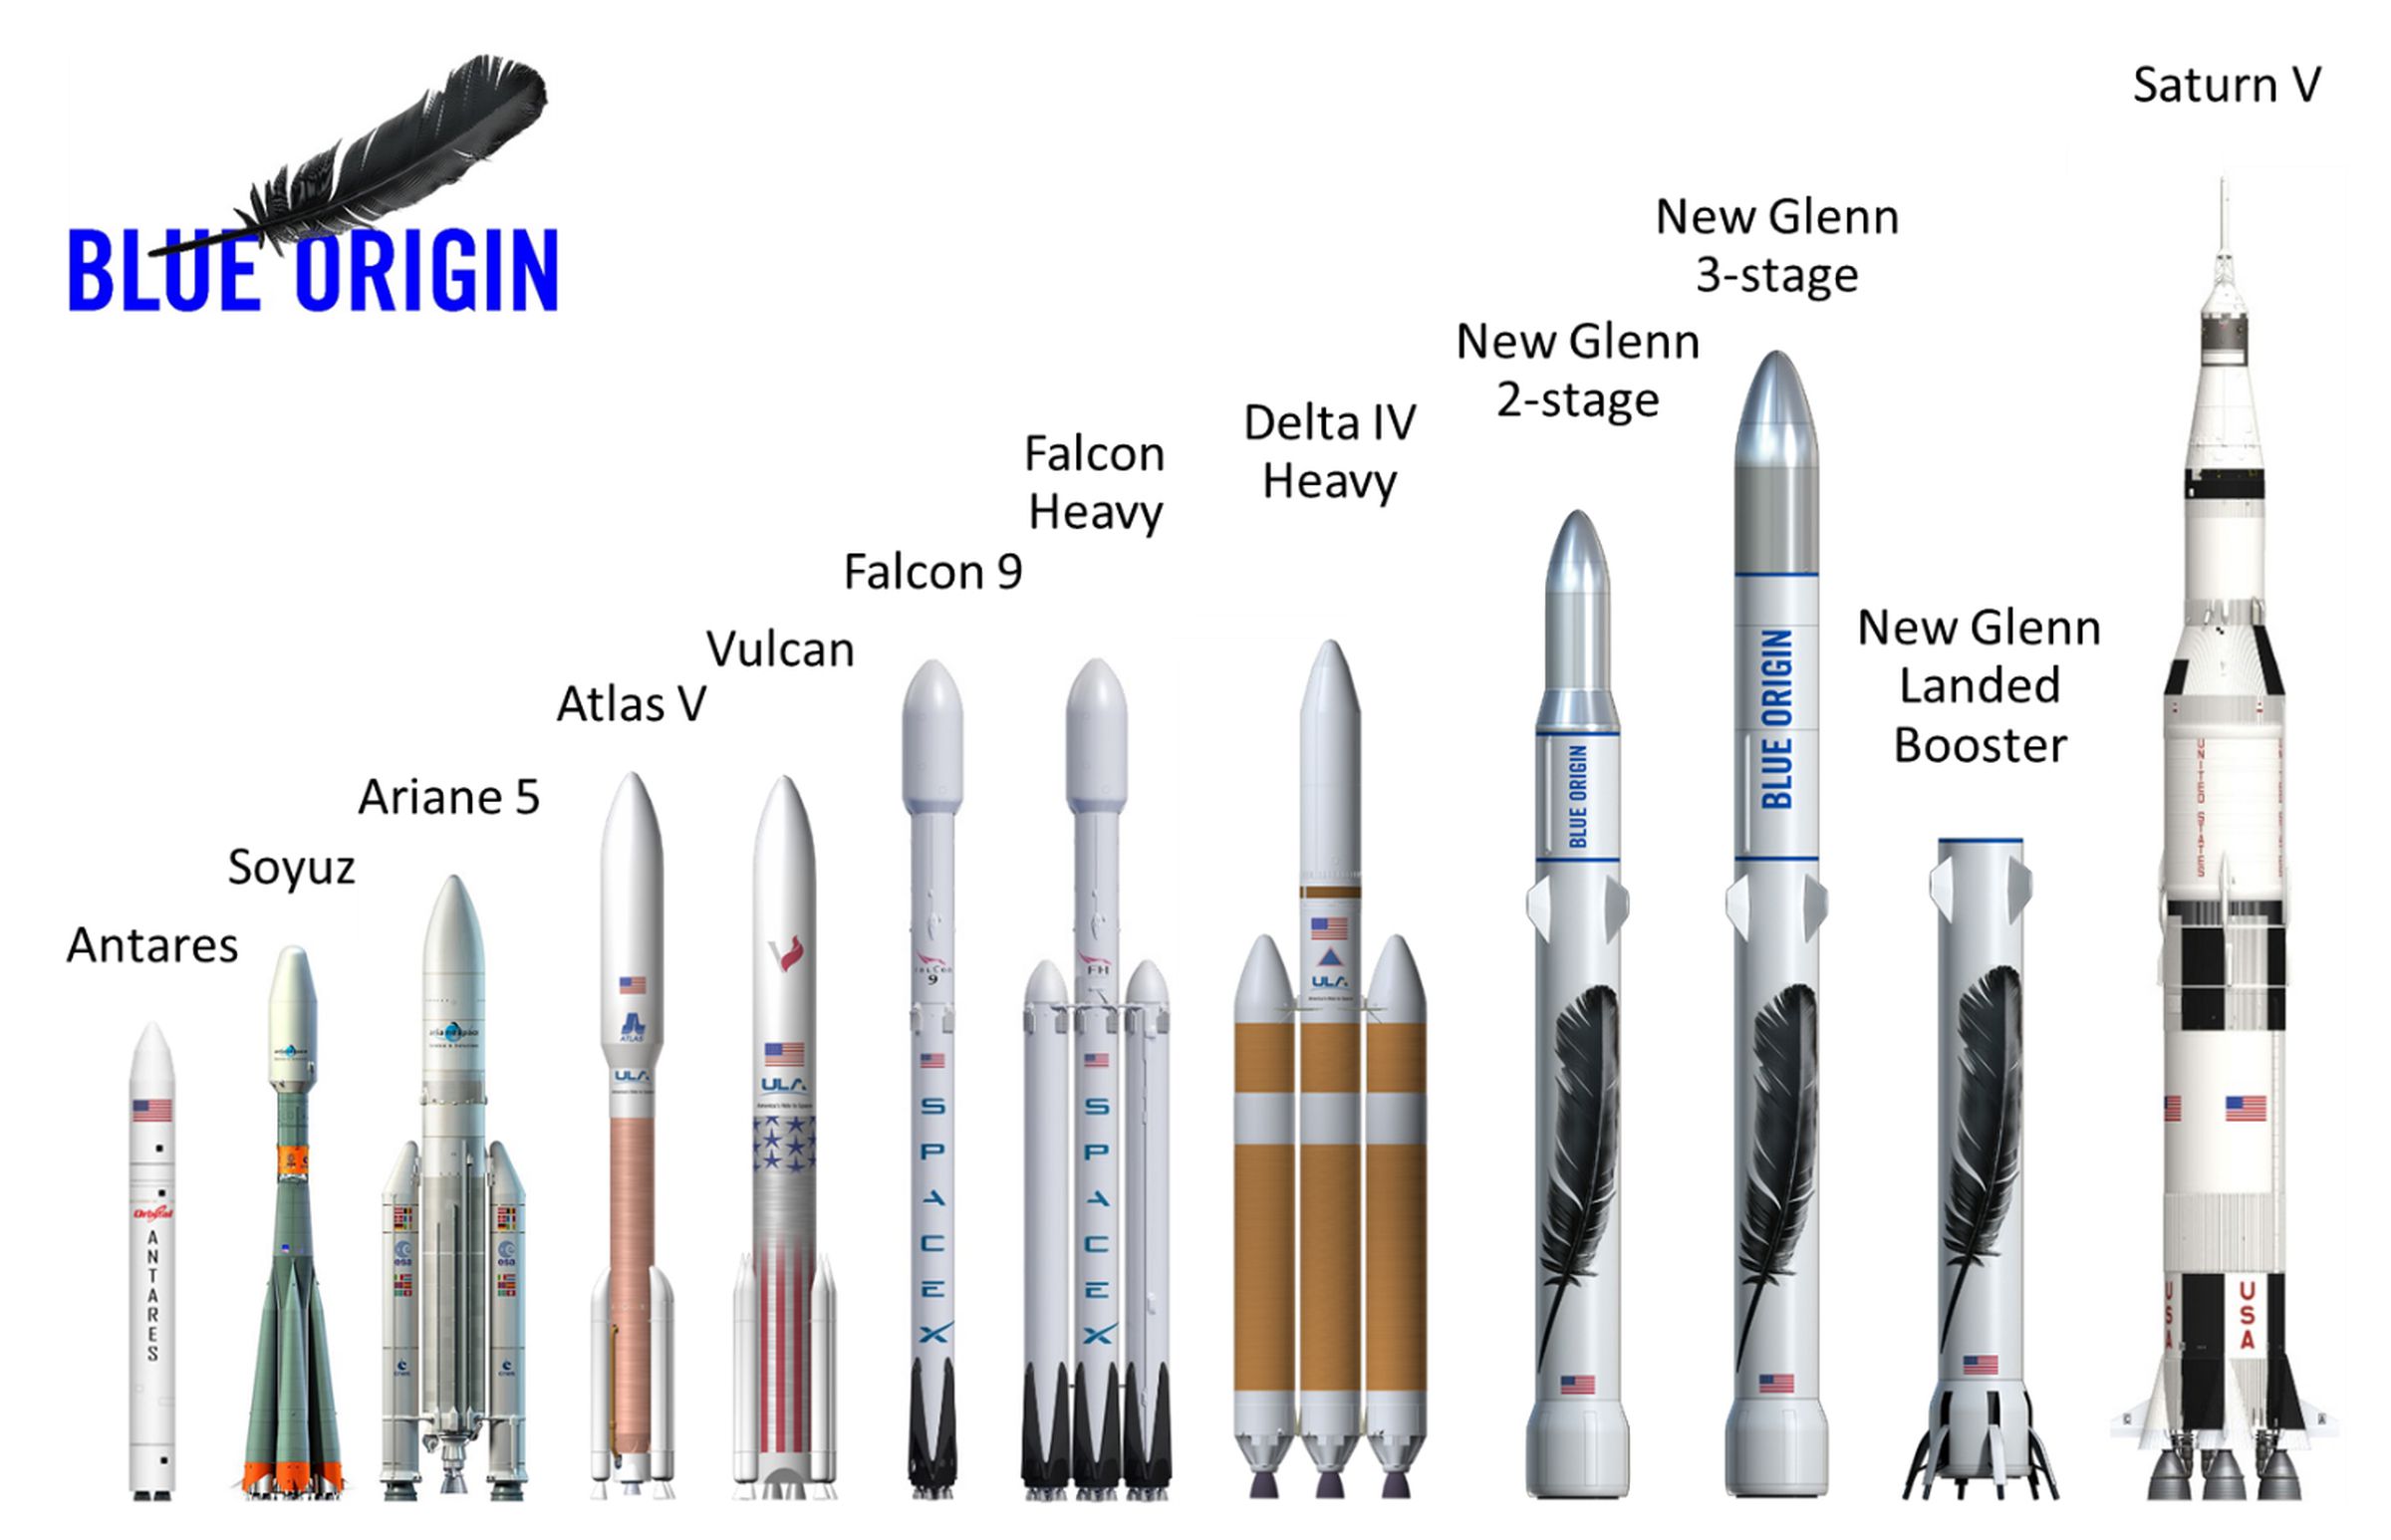 Blue Origin’s future New Glenn rocket, compared to other industry vehicles.